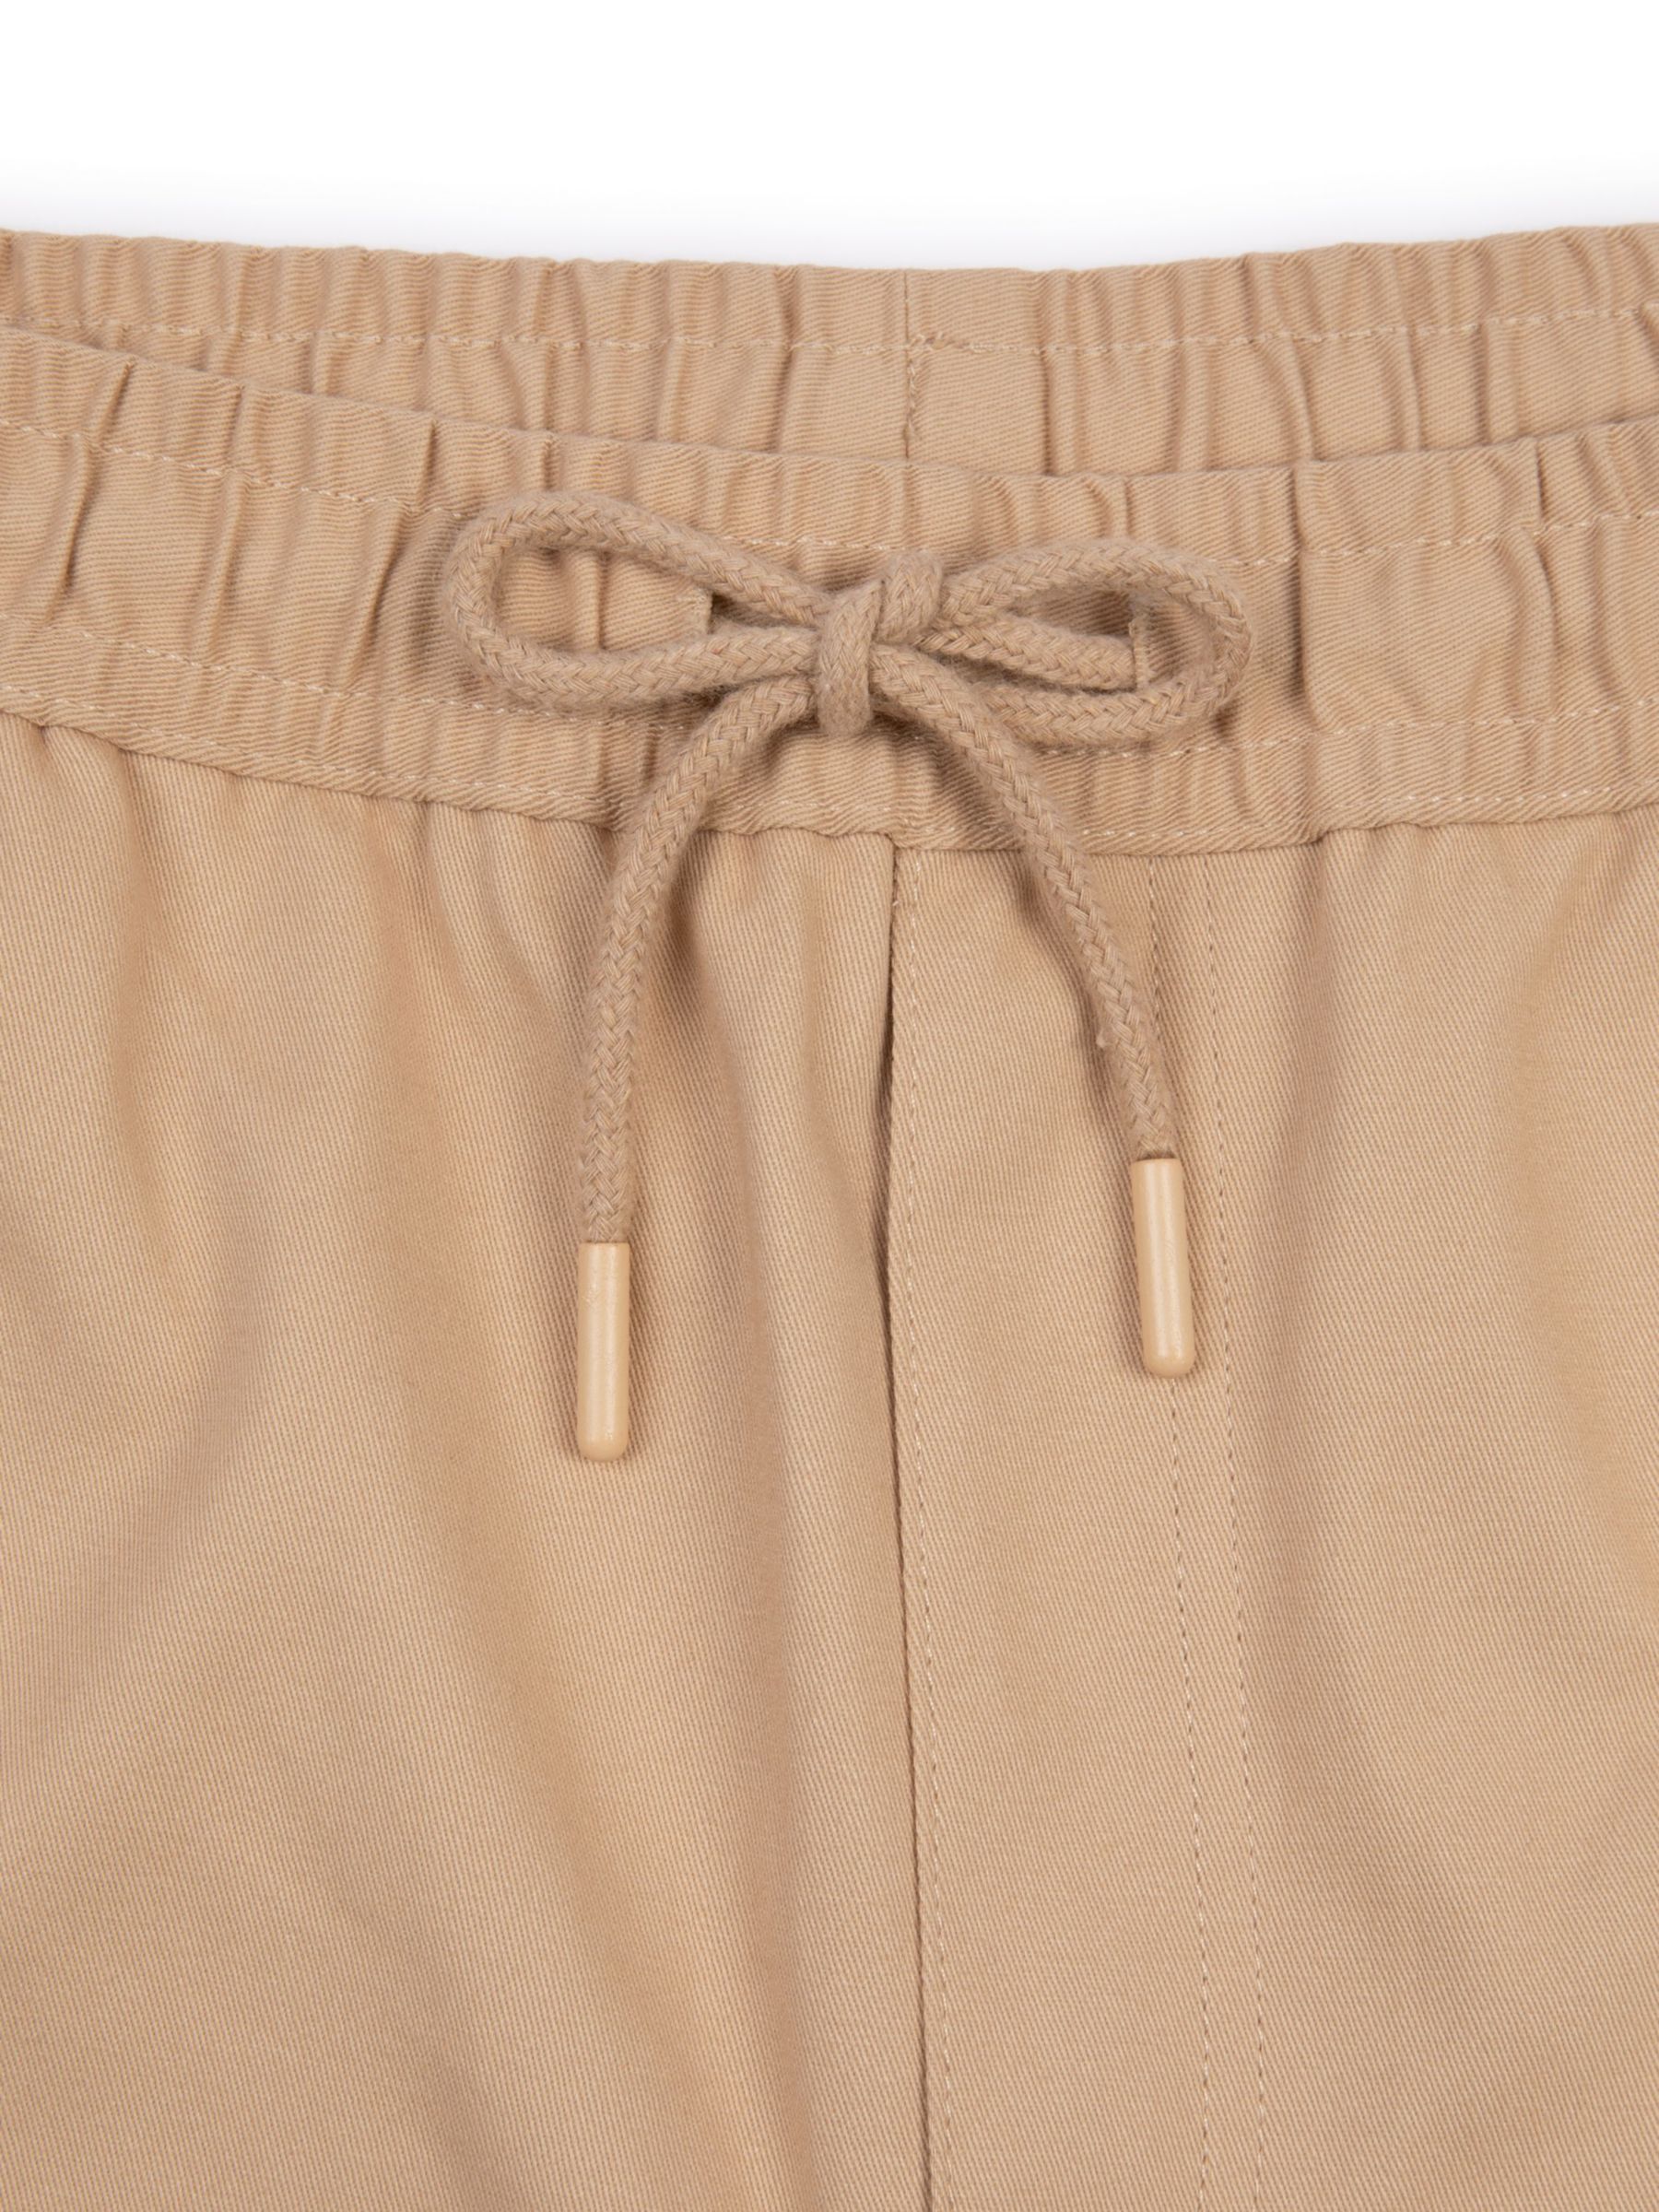 Buy Chelsea Peers Cotton Relaxed Chinos, Camel Online at johnlewis.com